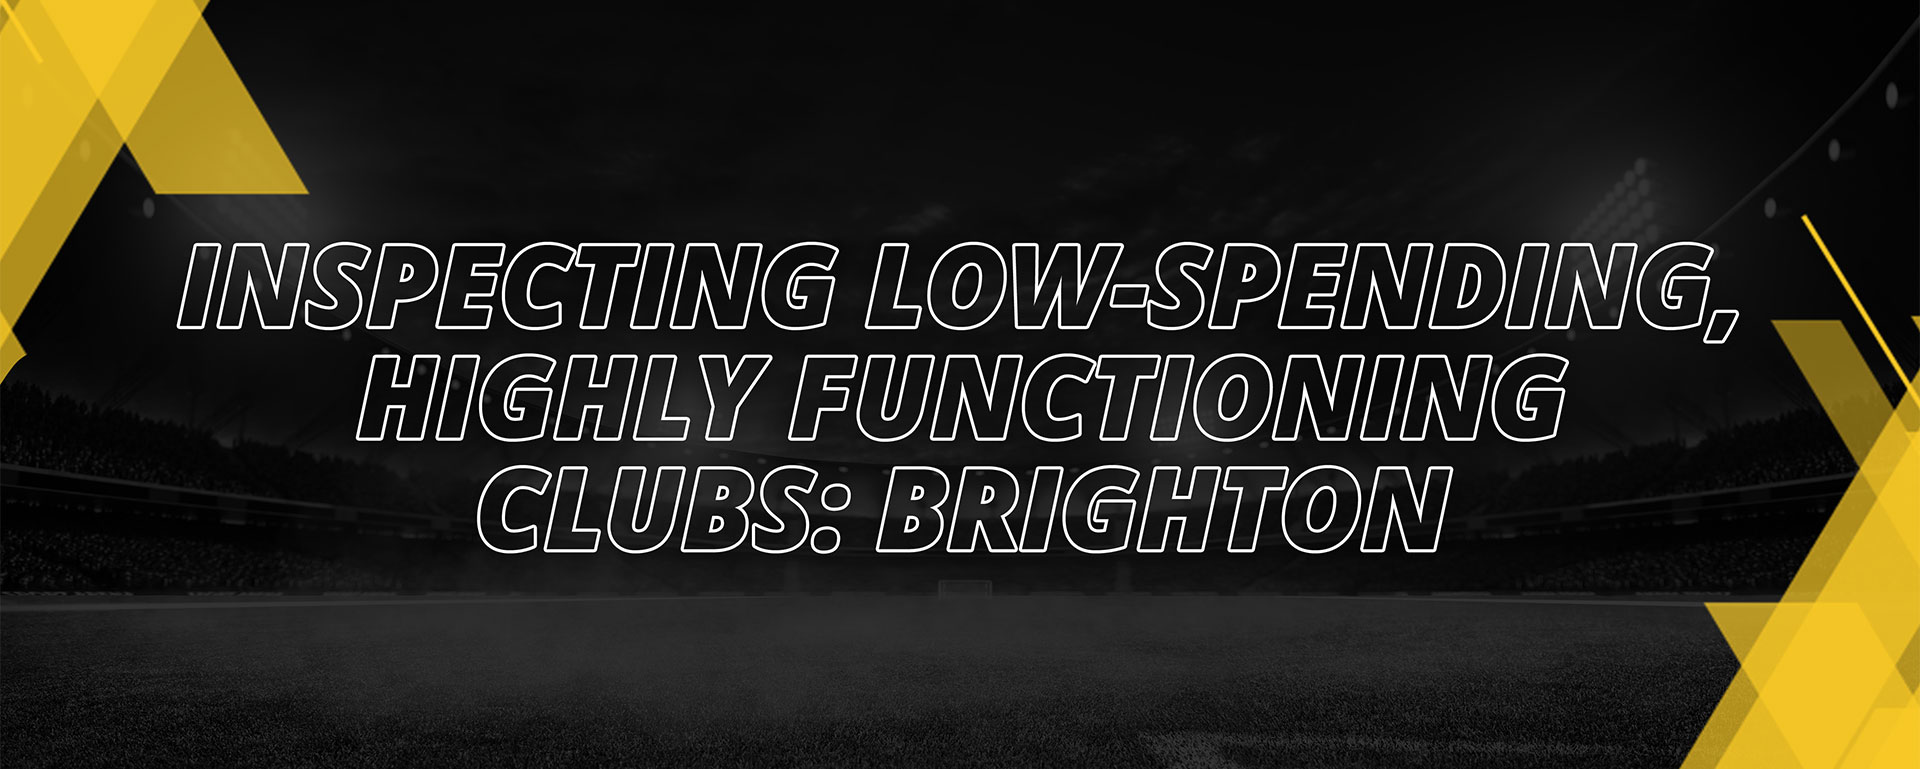 INSPECTING LOW-SPENDING, HIGHLY FUNCTIONAL CLUB: BRIGHTON